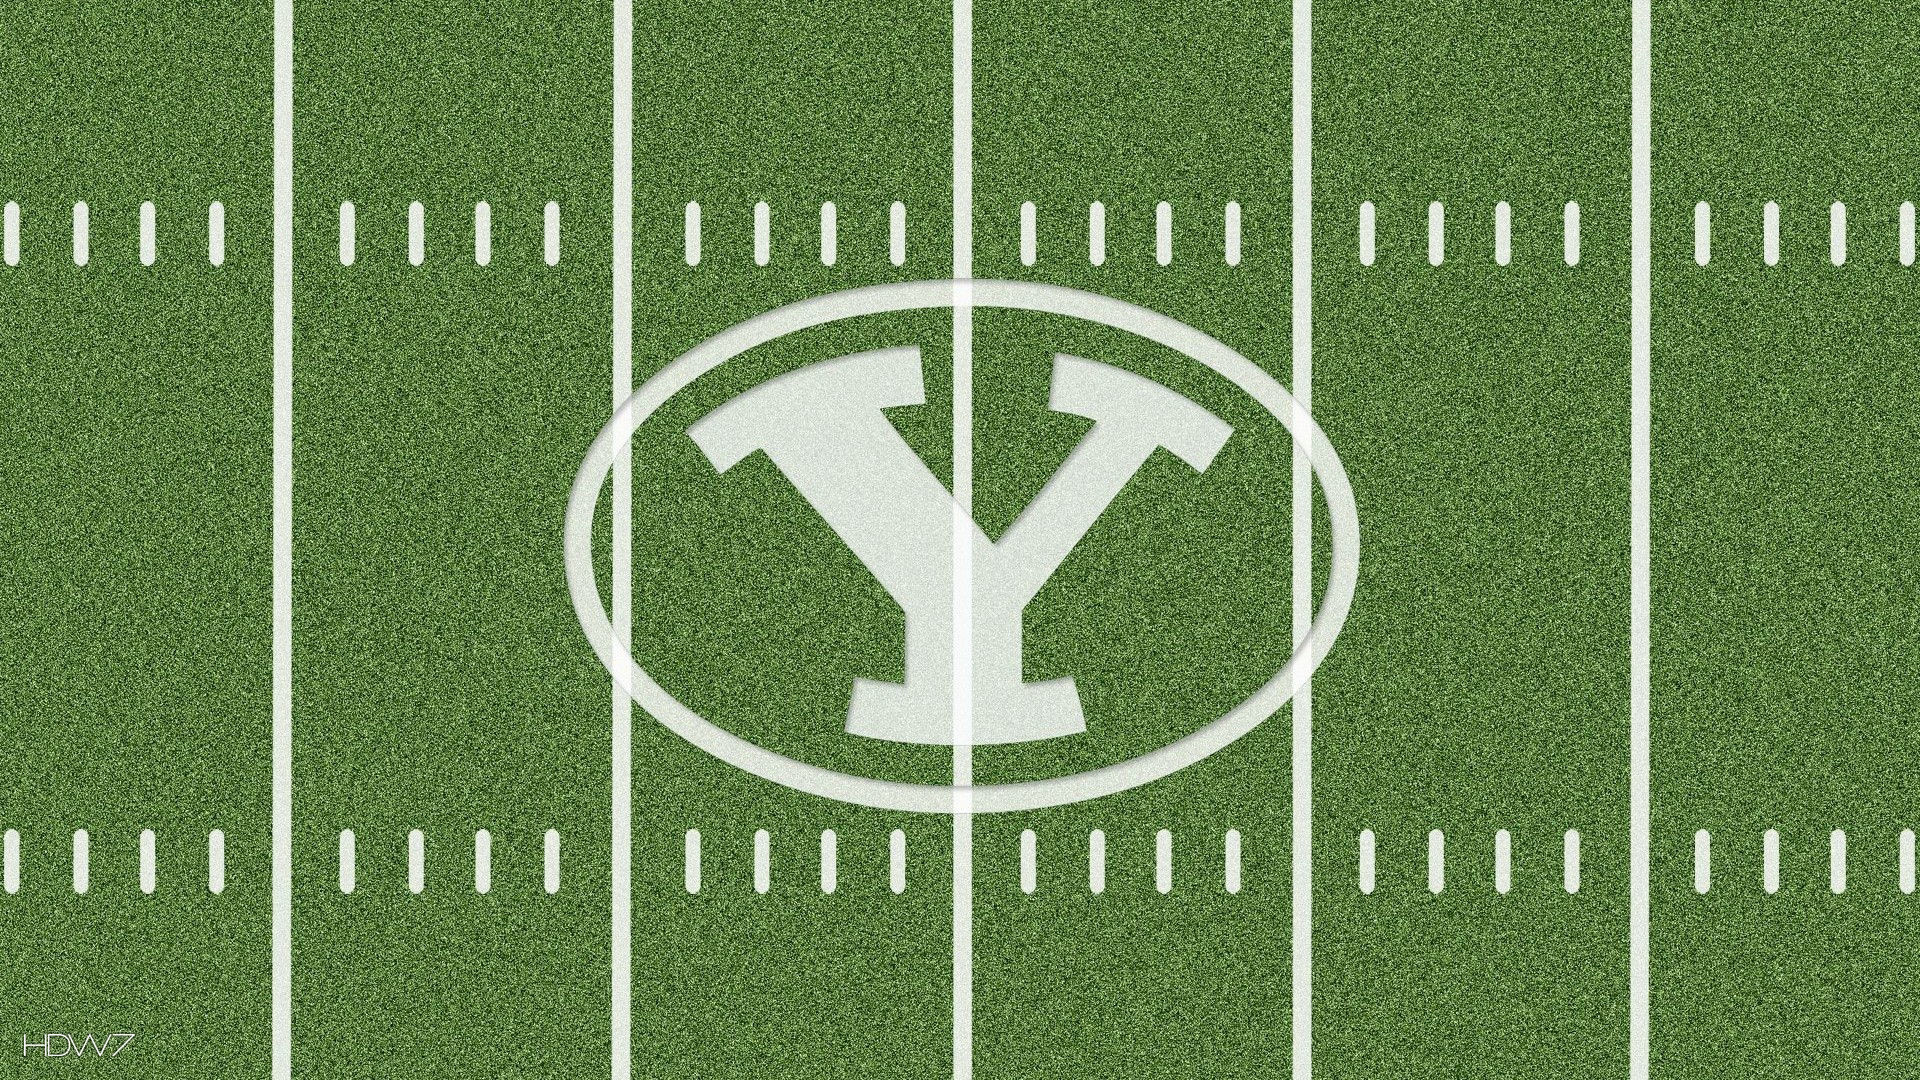 1920x1080 byu cougars logo on football field 1080p